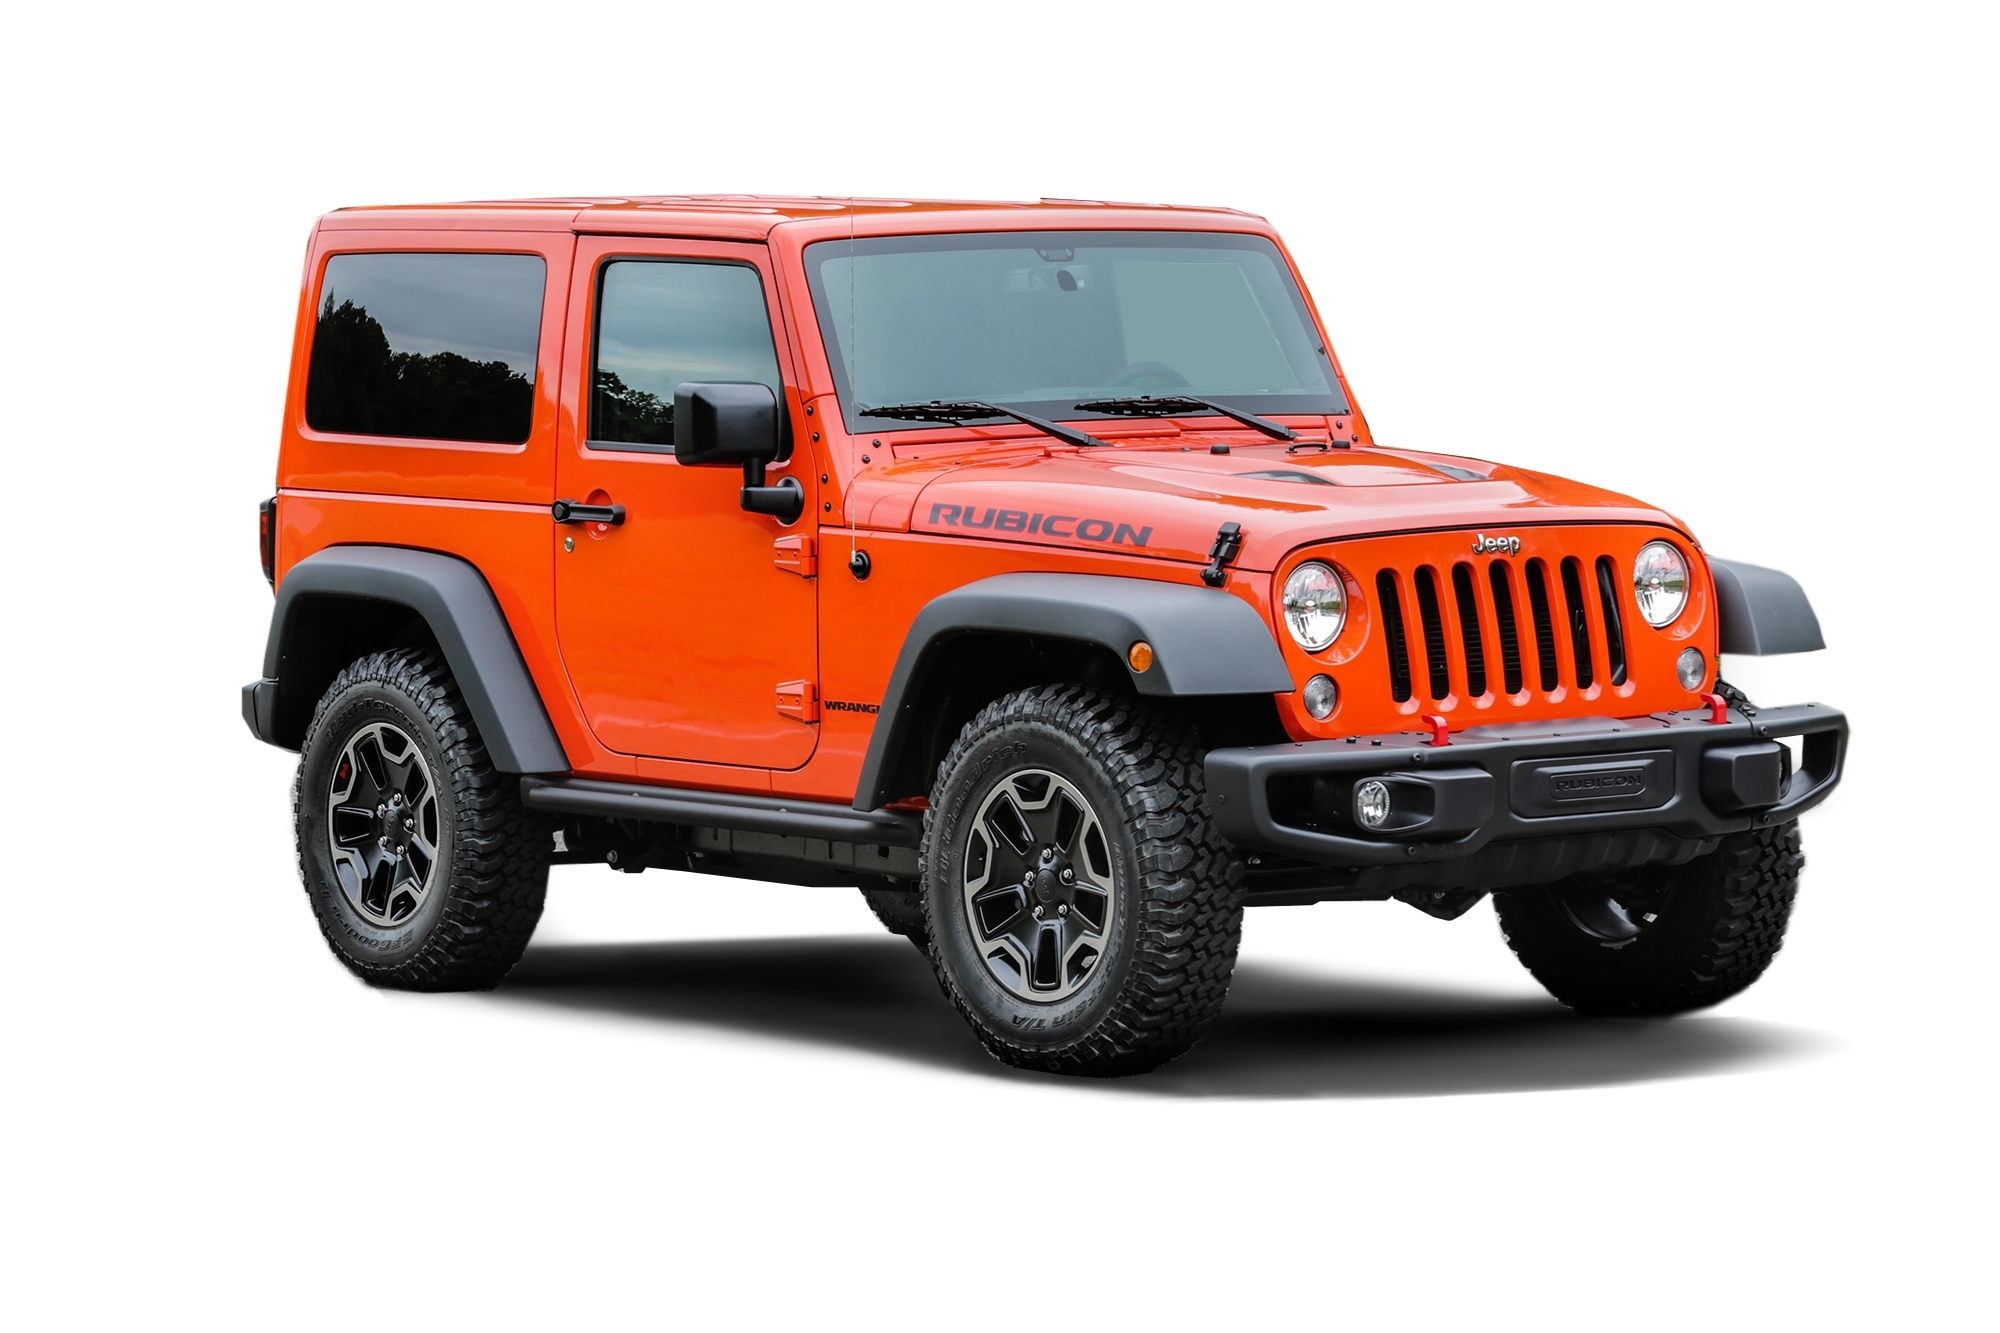 2015 Jeep Wrangler Freedom Edition Full Specs, Features and Price | CarBuzz